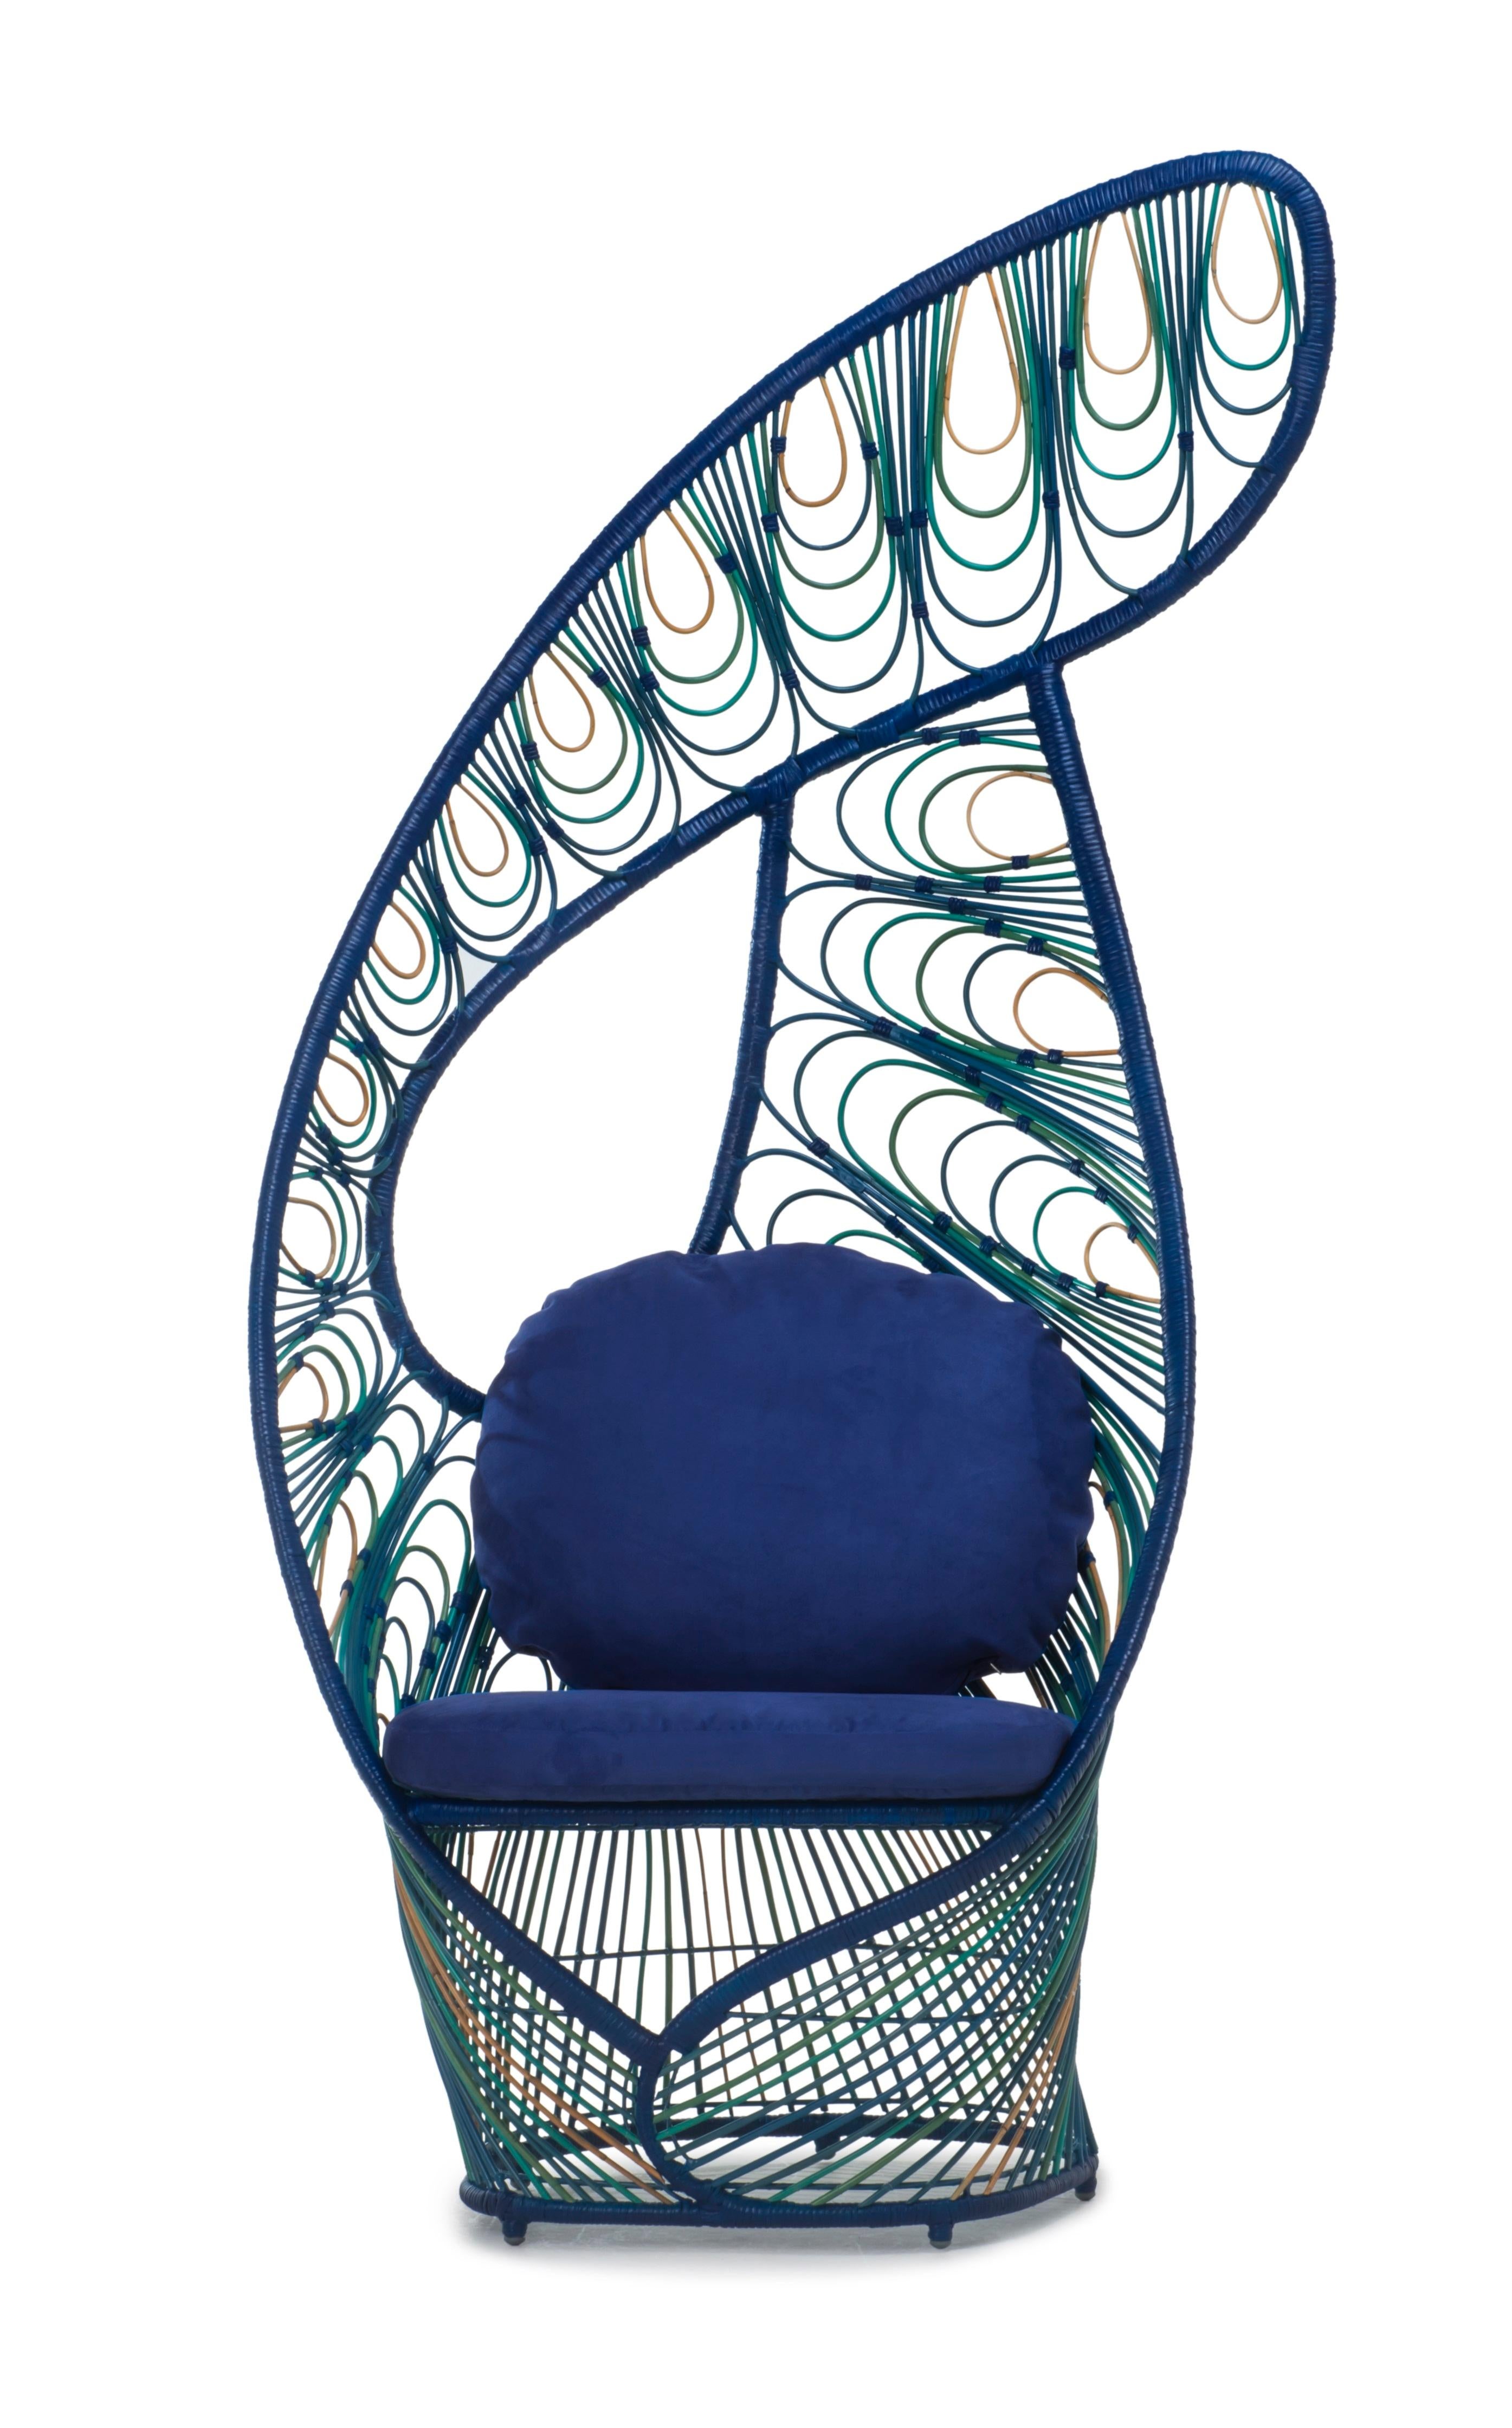 Peacock Easy armchair by Kenneth Cobonpue.
Materials: Rattan
Also available in other colors.
Dimensions: 68.5 cm x 90 cm x h 198 cm 

Peacock is a modern take on the traditional wicker chair of the same name. Like the regal bird, this lounge